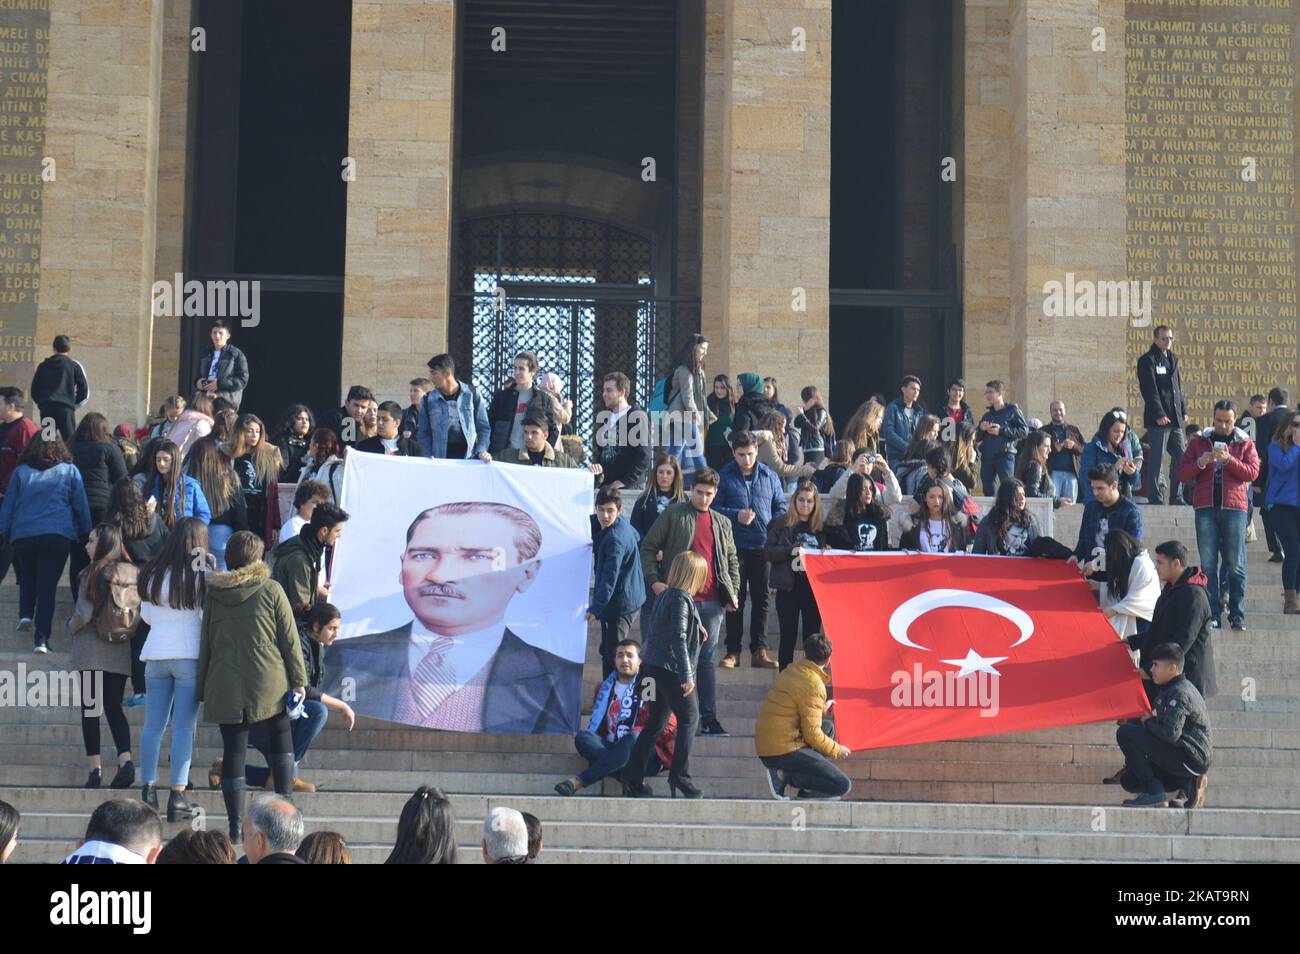 A photo taken in Ankara, Turkey on November 8, 2017 shows that a group of high school students poses with a Turkish flag and a portrait of Mustafa Kemal Ataturk as they visit Anitkabir, the Mausoleum of founder and first president of modern Turkey Mustafa Kemal Ataturk, prior to the 79th anniversary of his death on November 10. Turkish citizens commemorate the death anniversary of Ataturk, the national hero of modern Turkey, who passed away 79 years ago, at 9:05 A.M. on November 10, 1938 at the age of 57. Photo was taken on November 8, and was issued on November 9. (Photo by Altan Gocher/NurPh Stock Photo